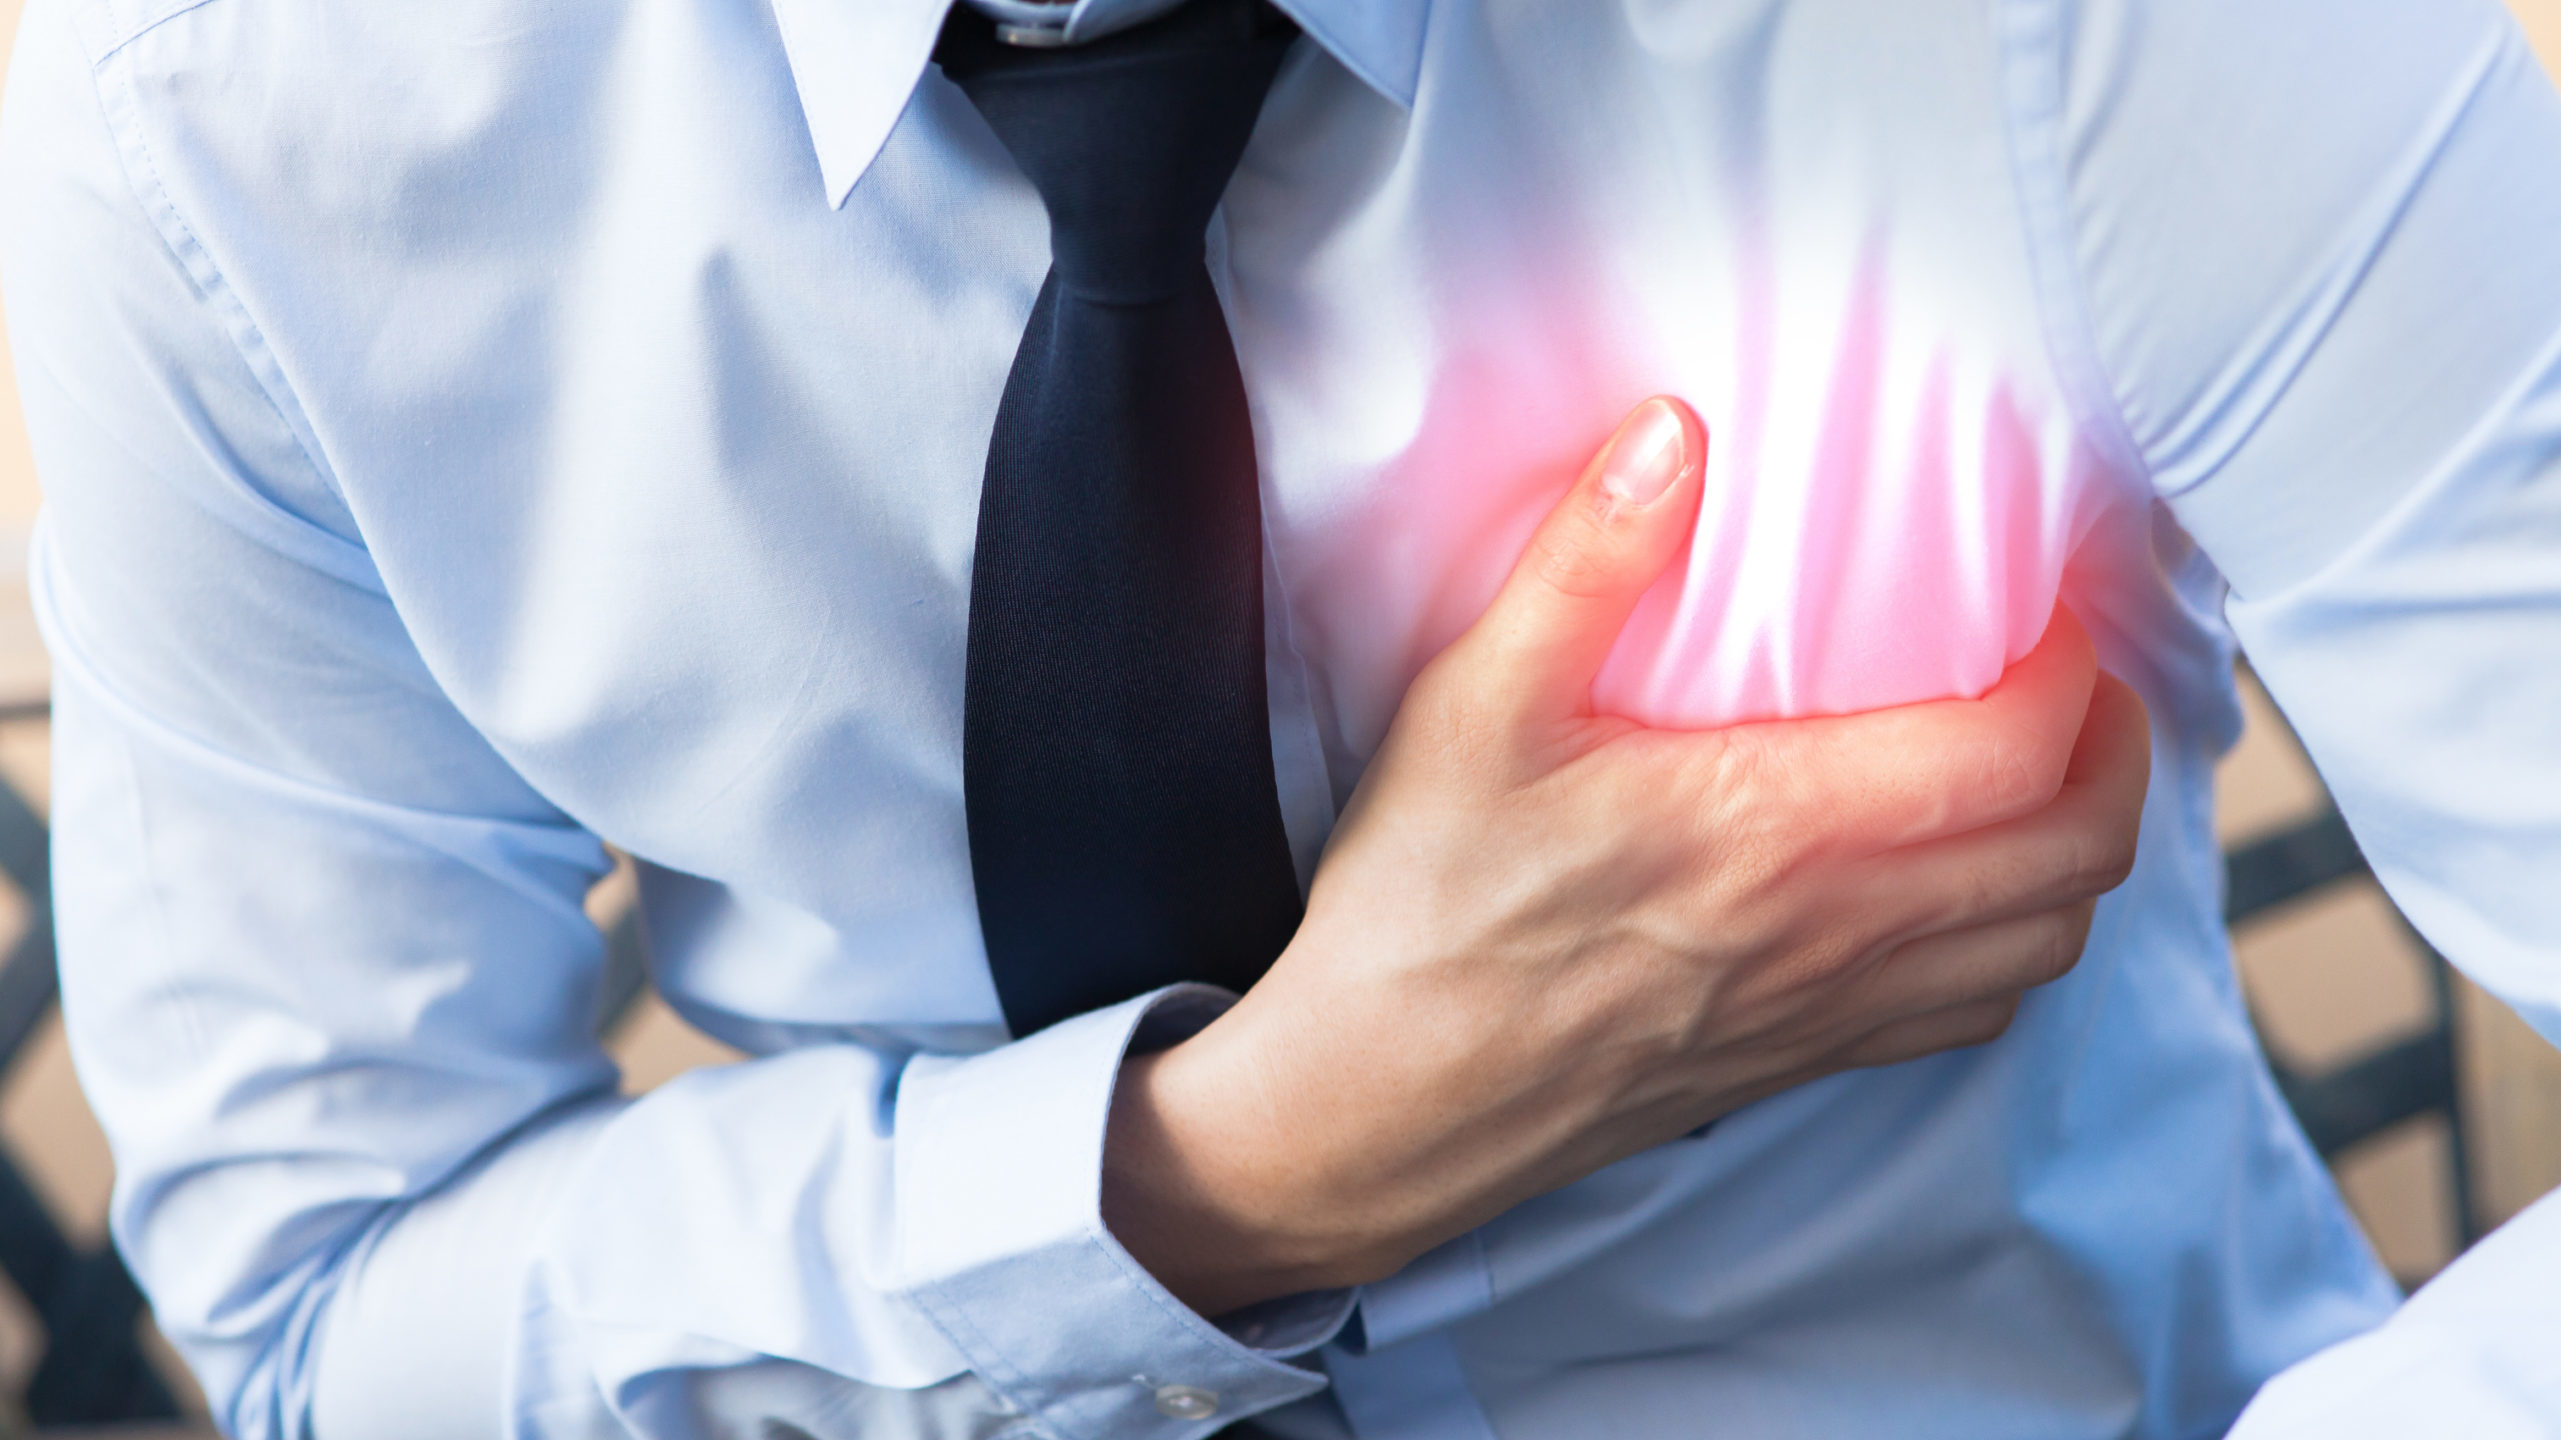 Heart Attack Symptoms and First Aid